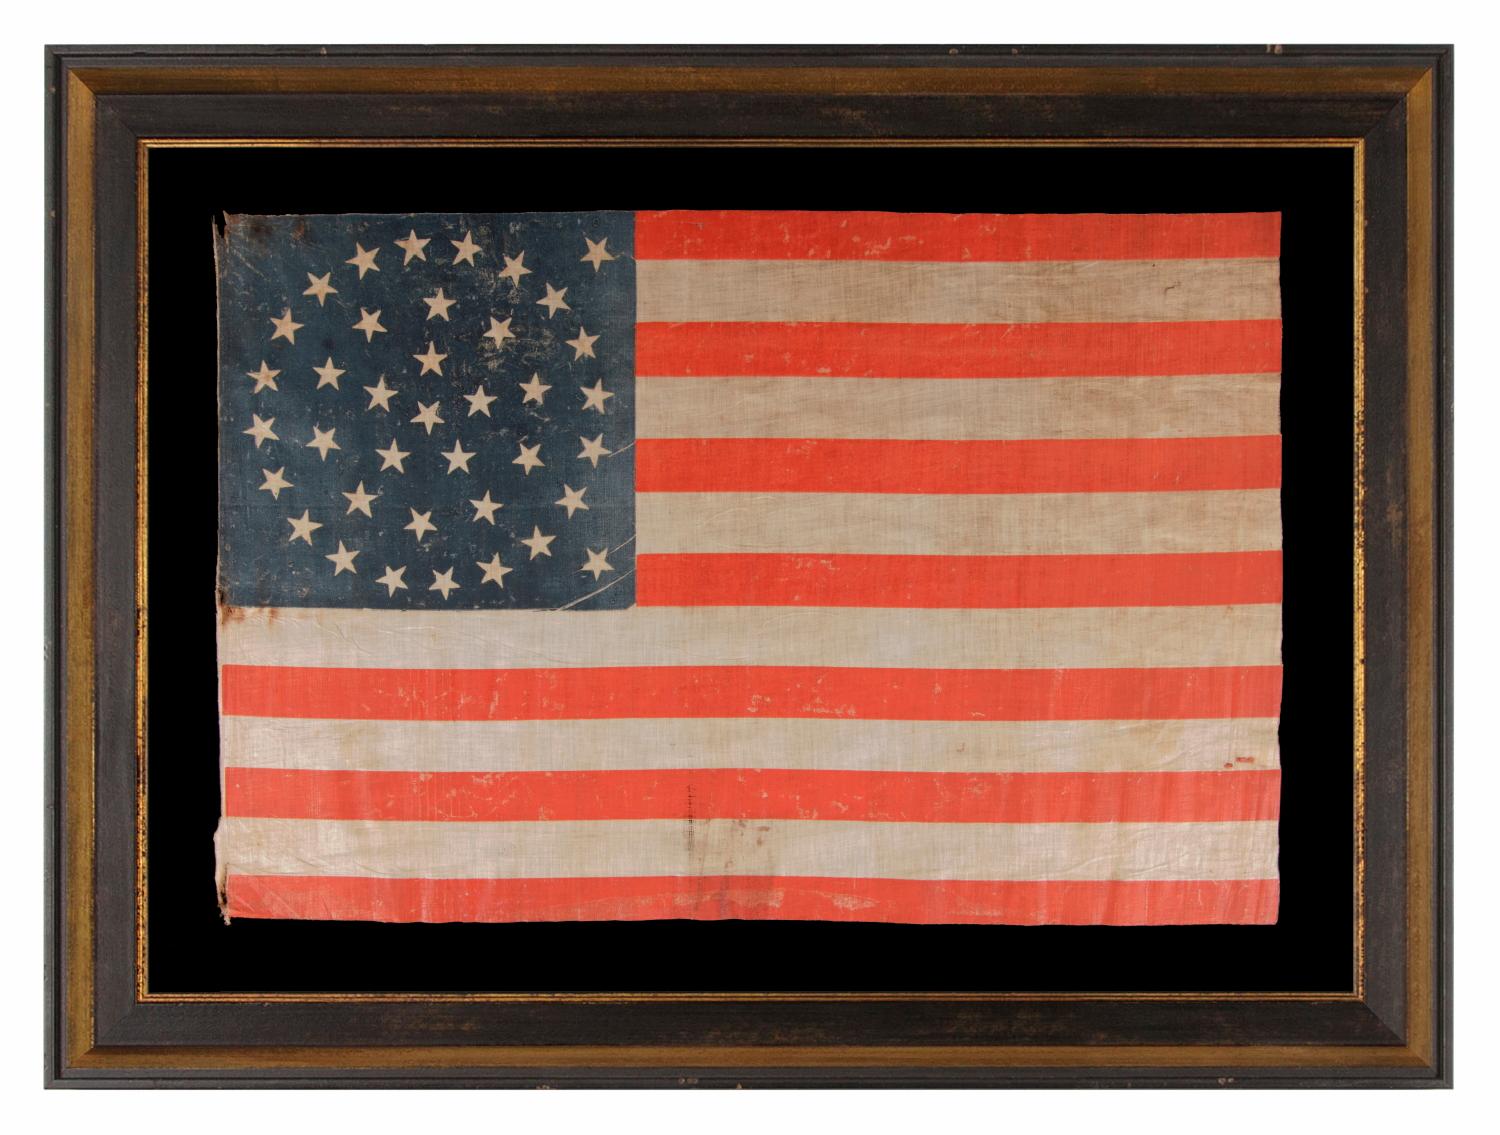 38 Stars in a Medallion Configuration, on a Large Scale Antique American Flag